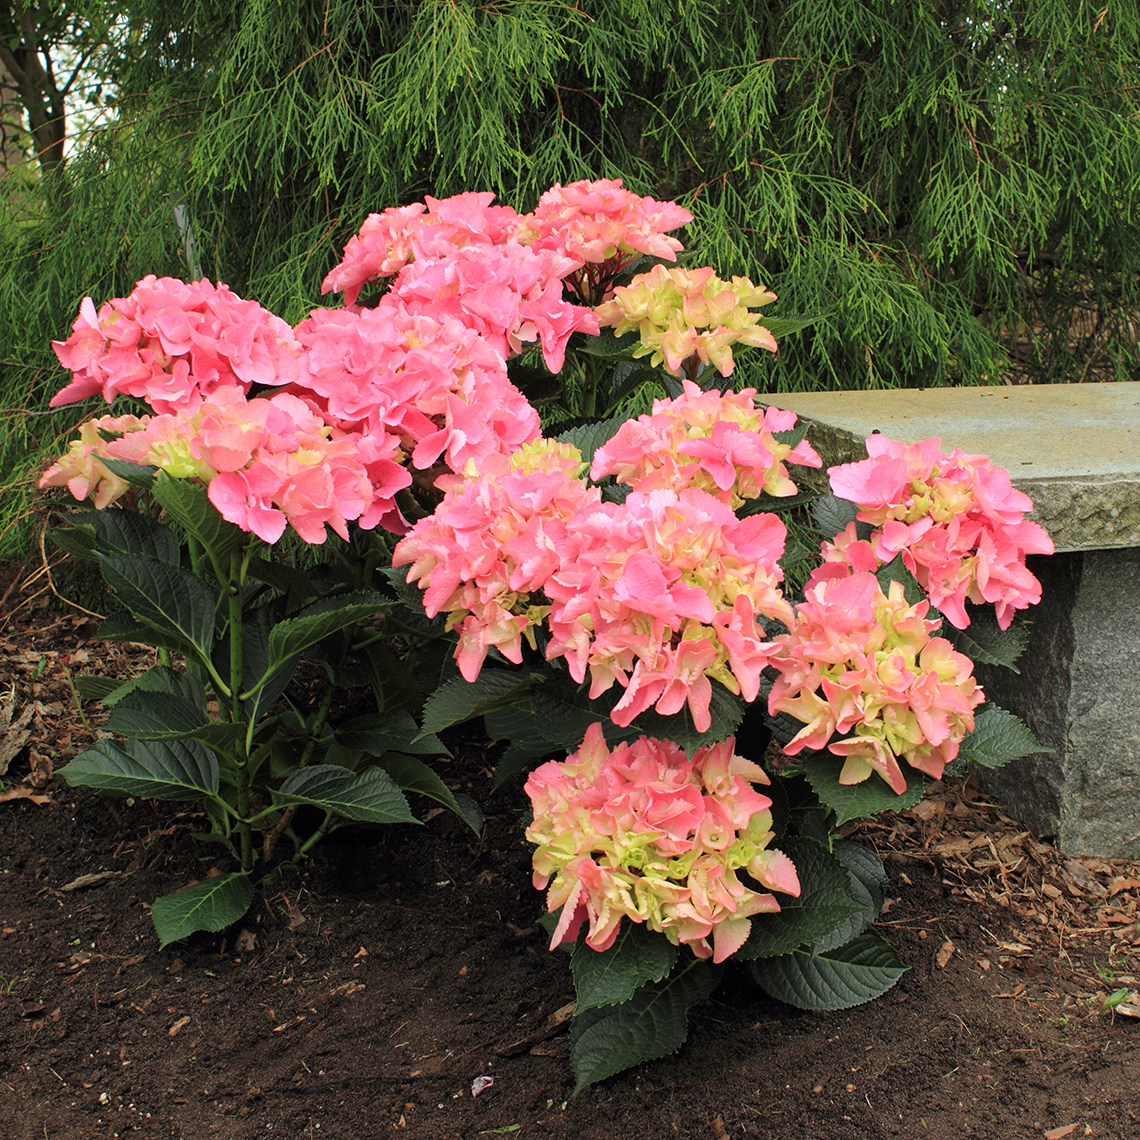 Cityline Venice hydrangea blooming with pink mophead flowers next to a granite bench